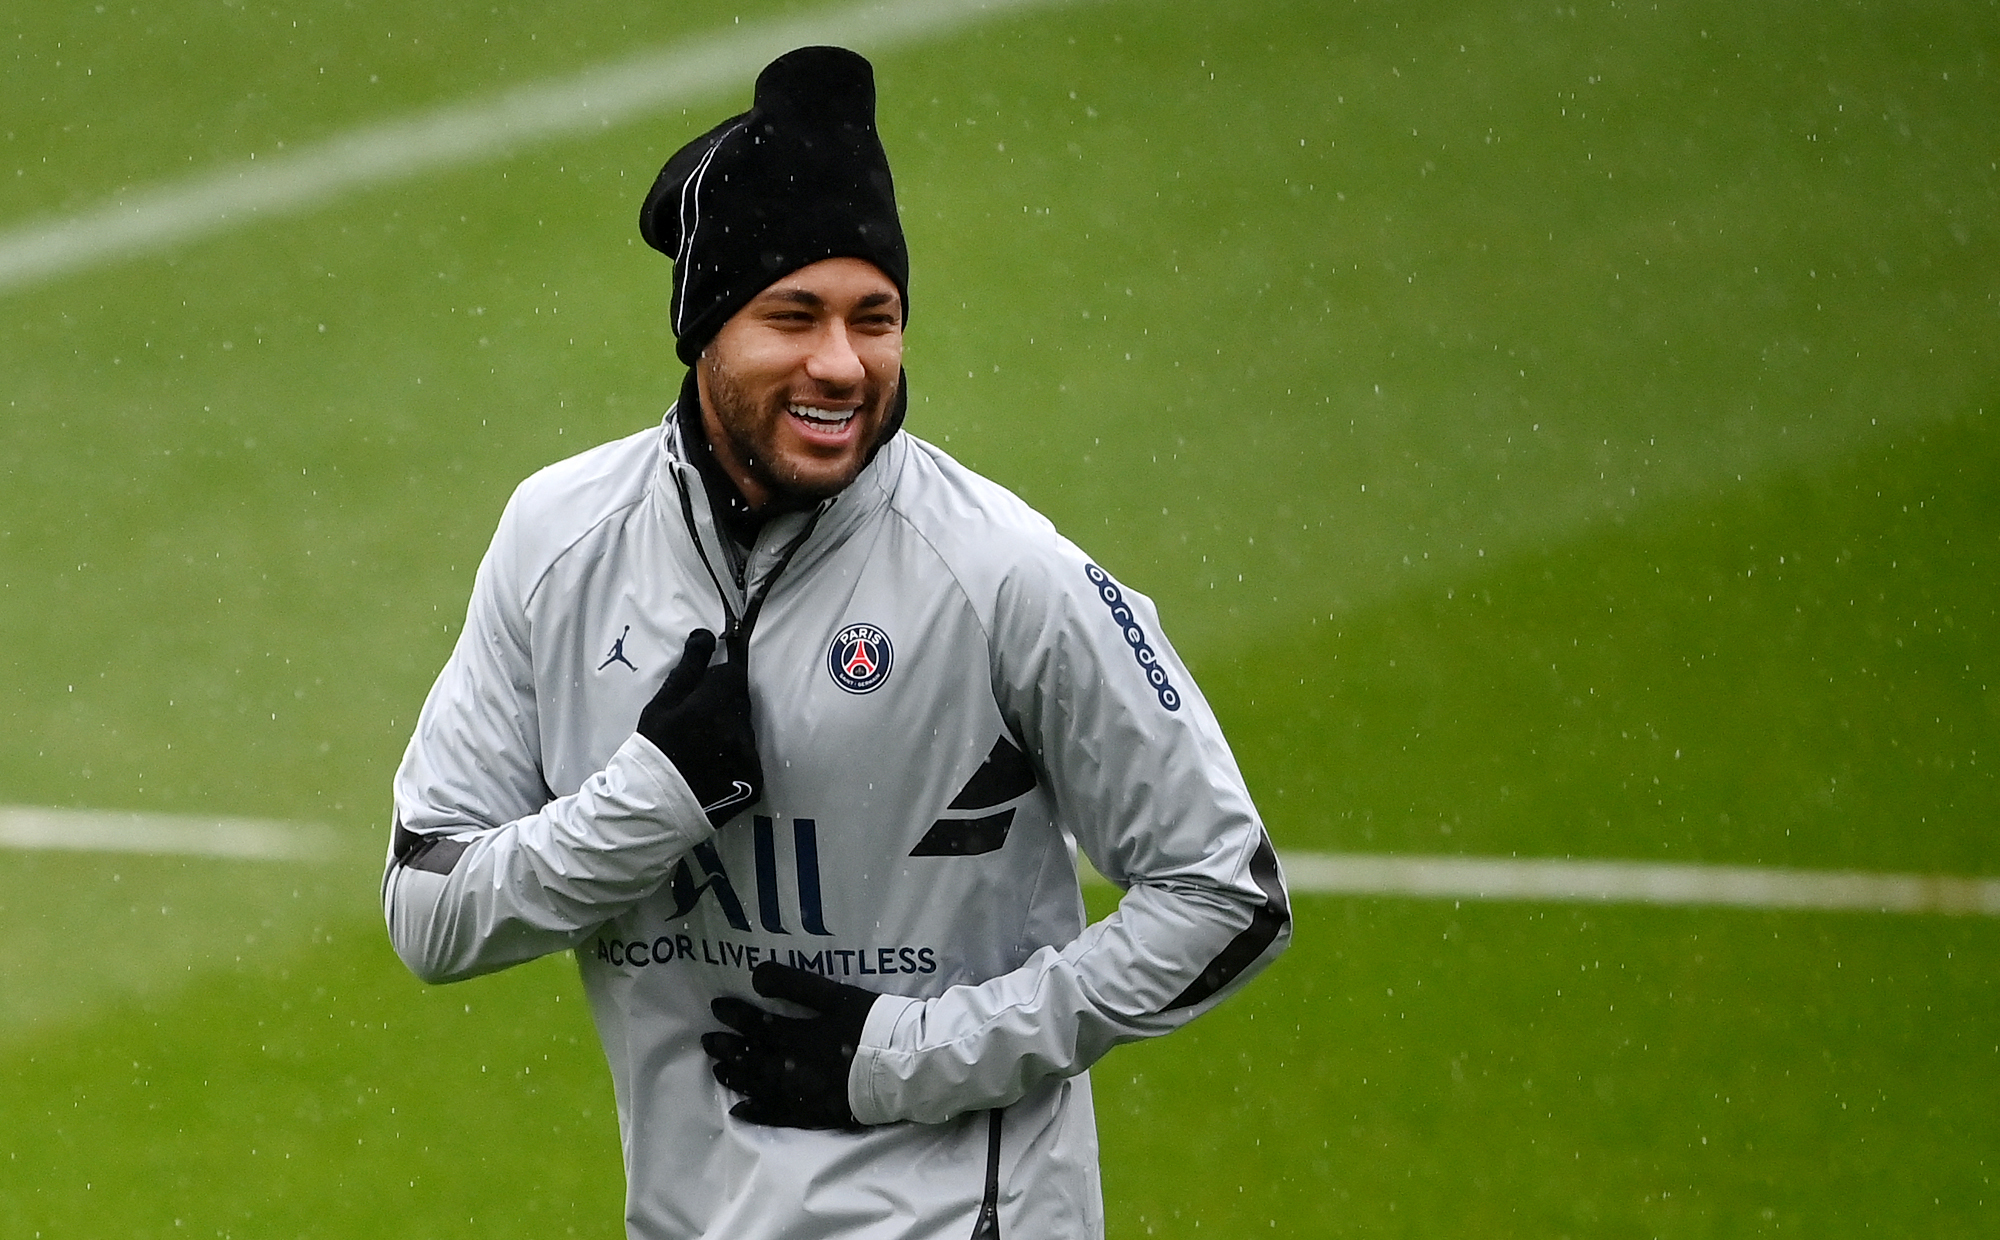 Transfer News: Manchester United in contact with agents of Neymar over a potential move.